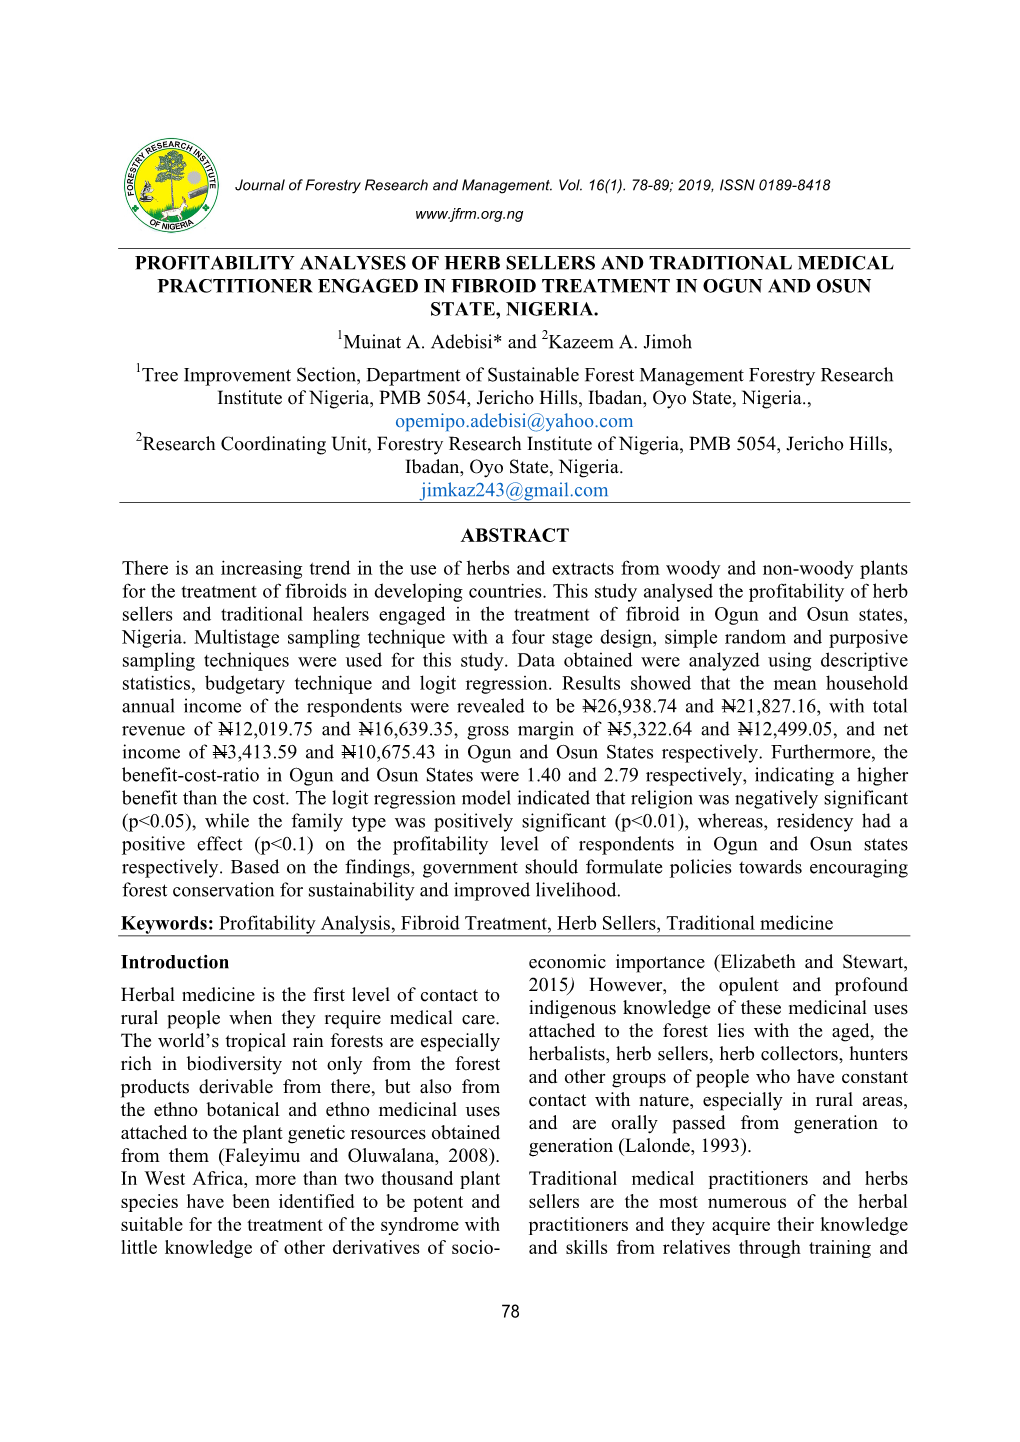 Profitability Analyses of Herb Sellers and Traditional Medical Practitioner Engaged in Fibroid Treatment in Ogun and Osun State, Nigeria